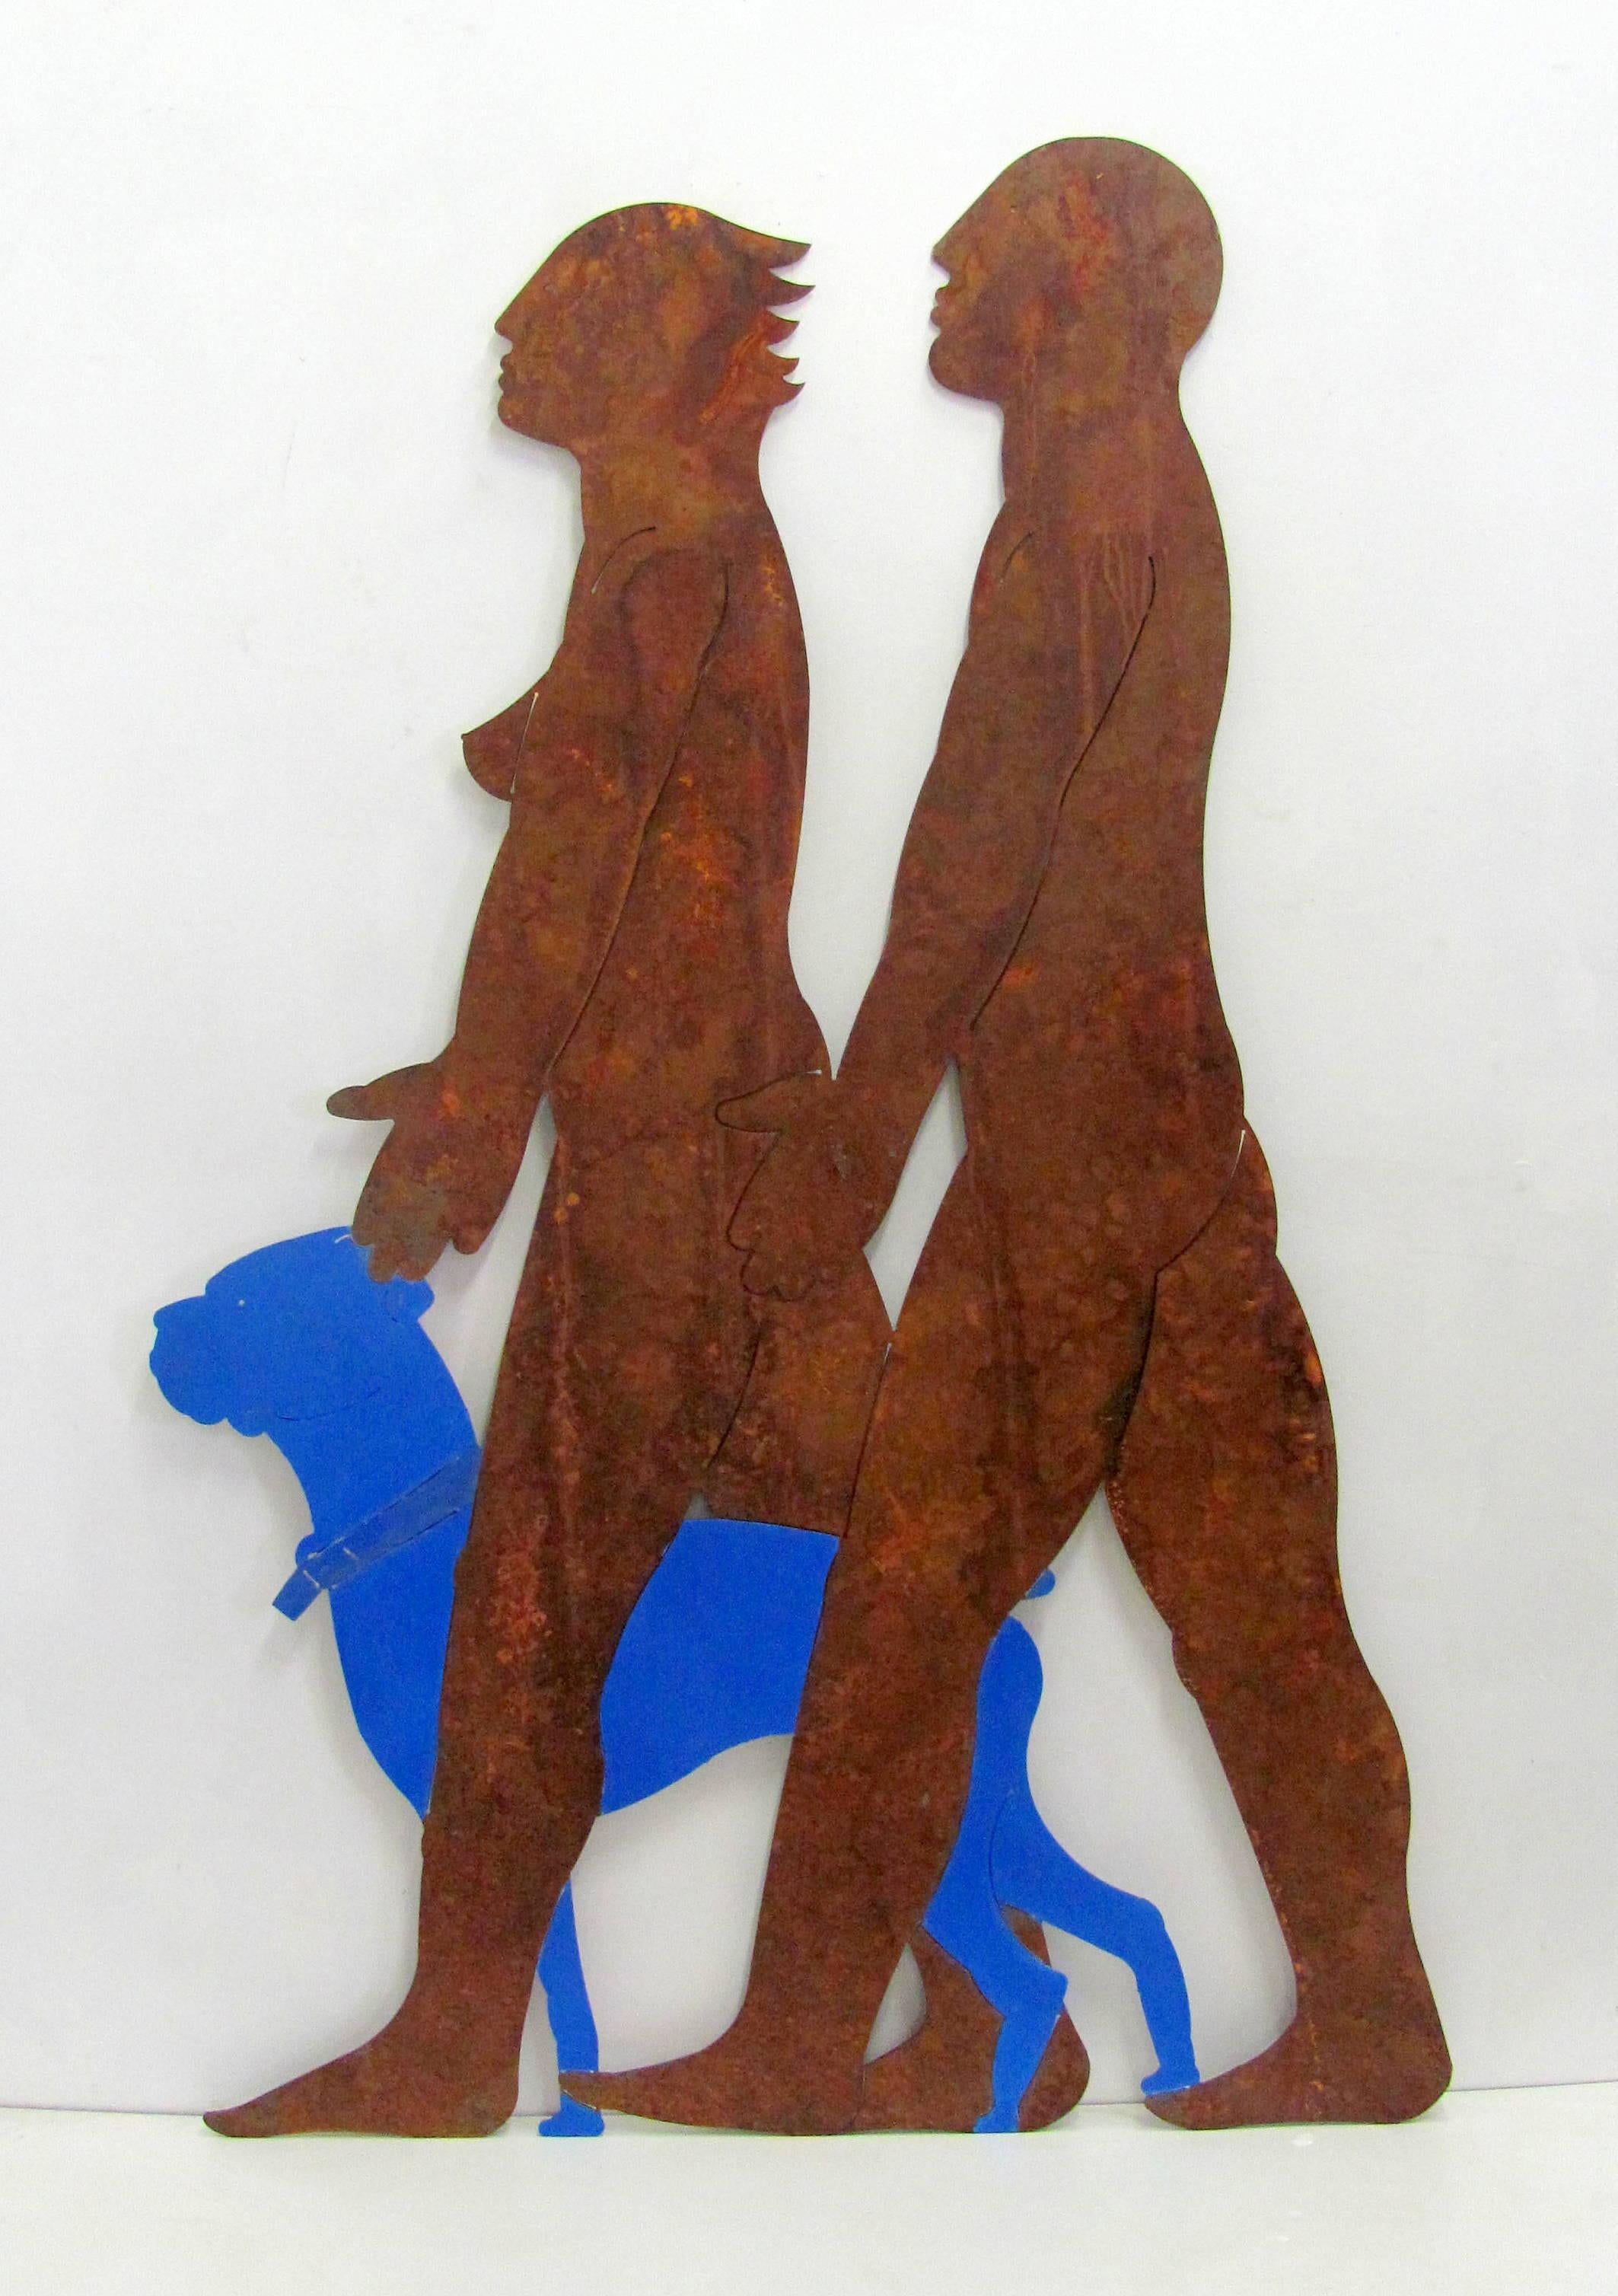 Uwe Pfaff Abstract Sculpture - Large Rusted Steel Wall Mounted Sculpture " A Blue Day for Anabelle"